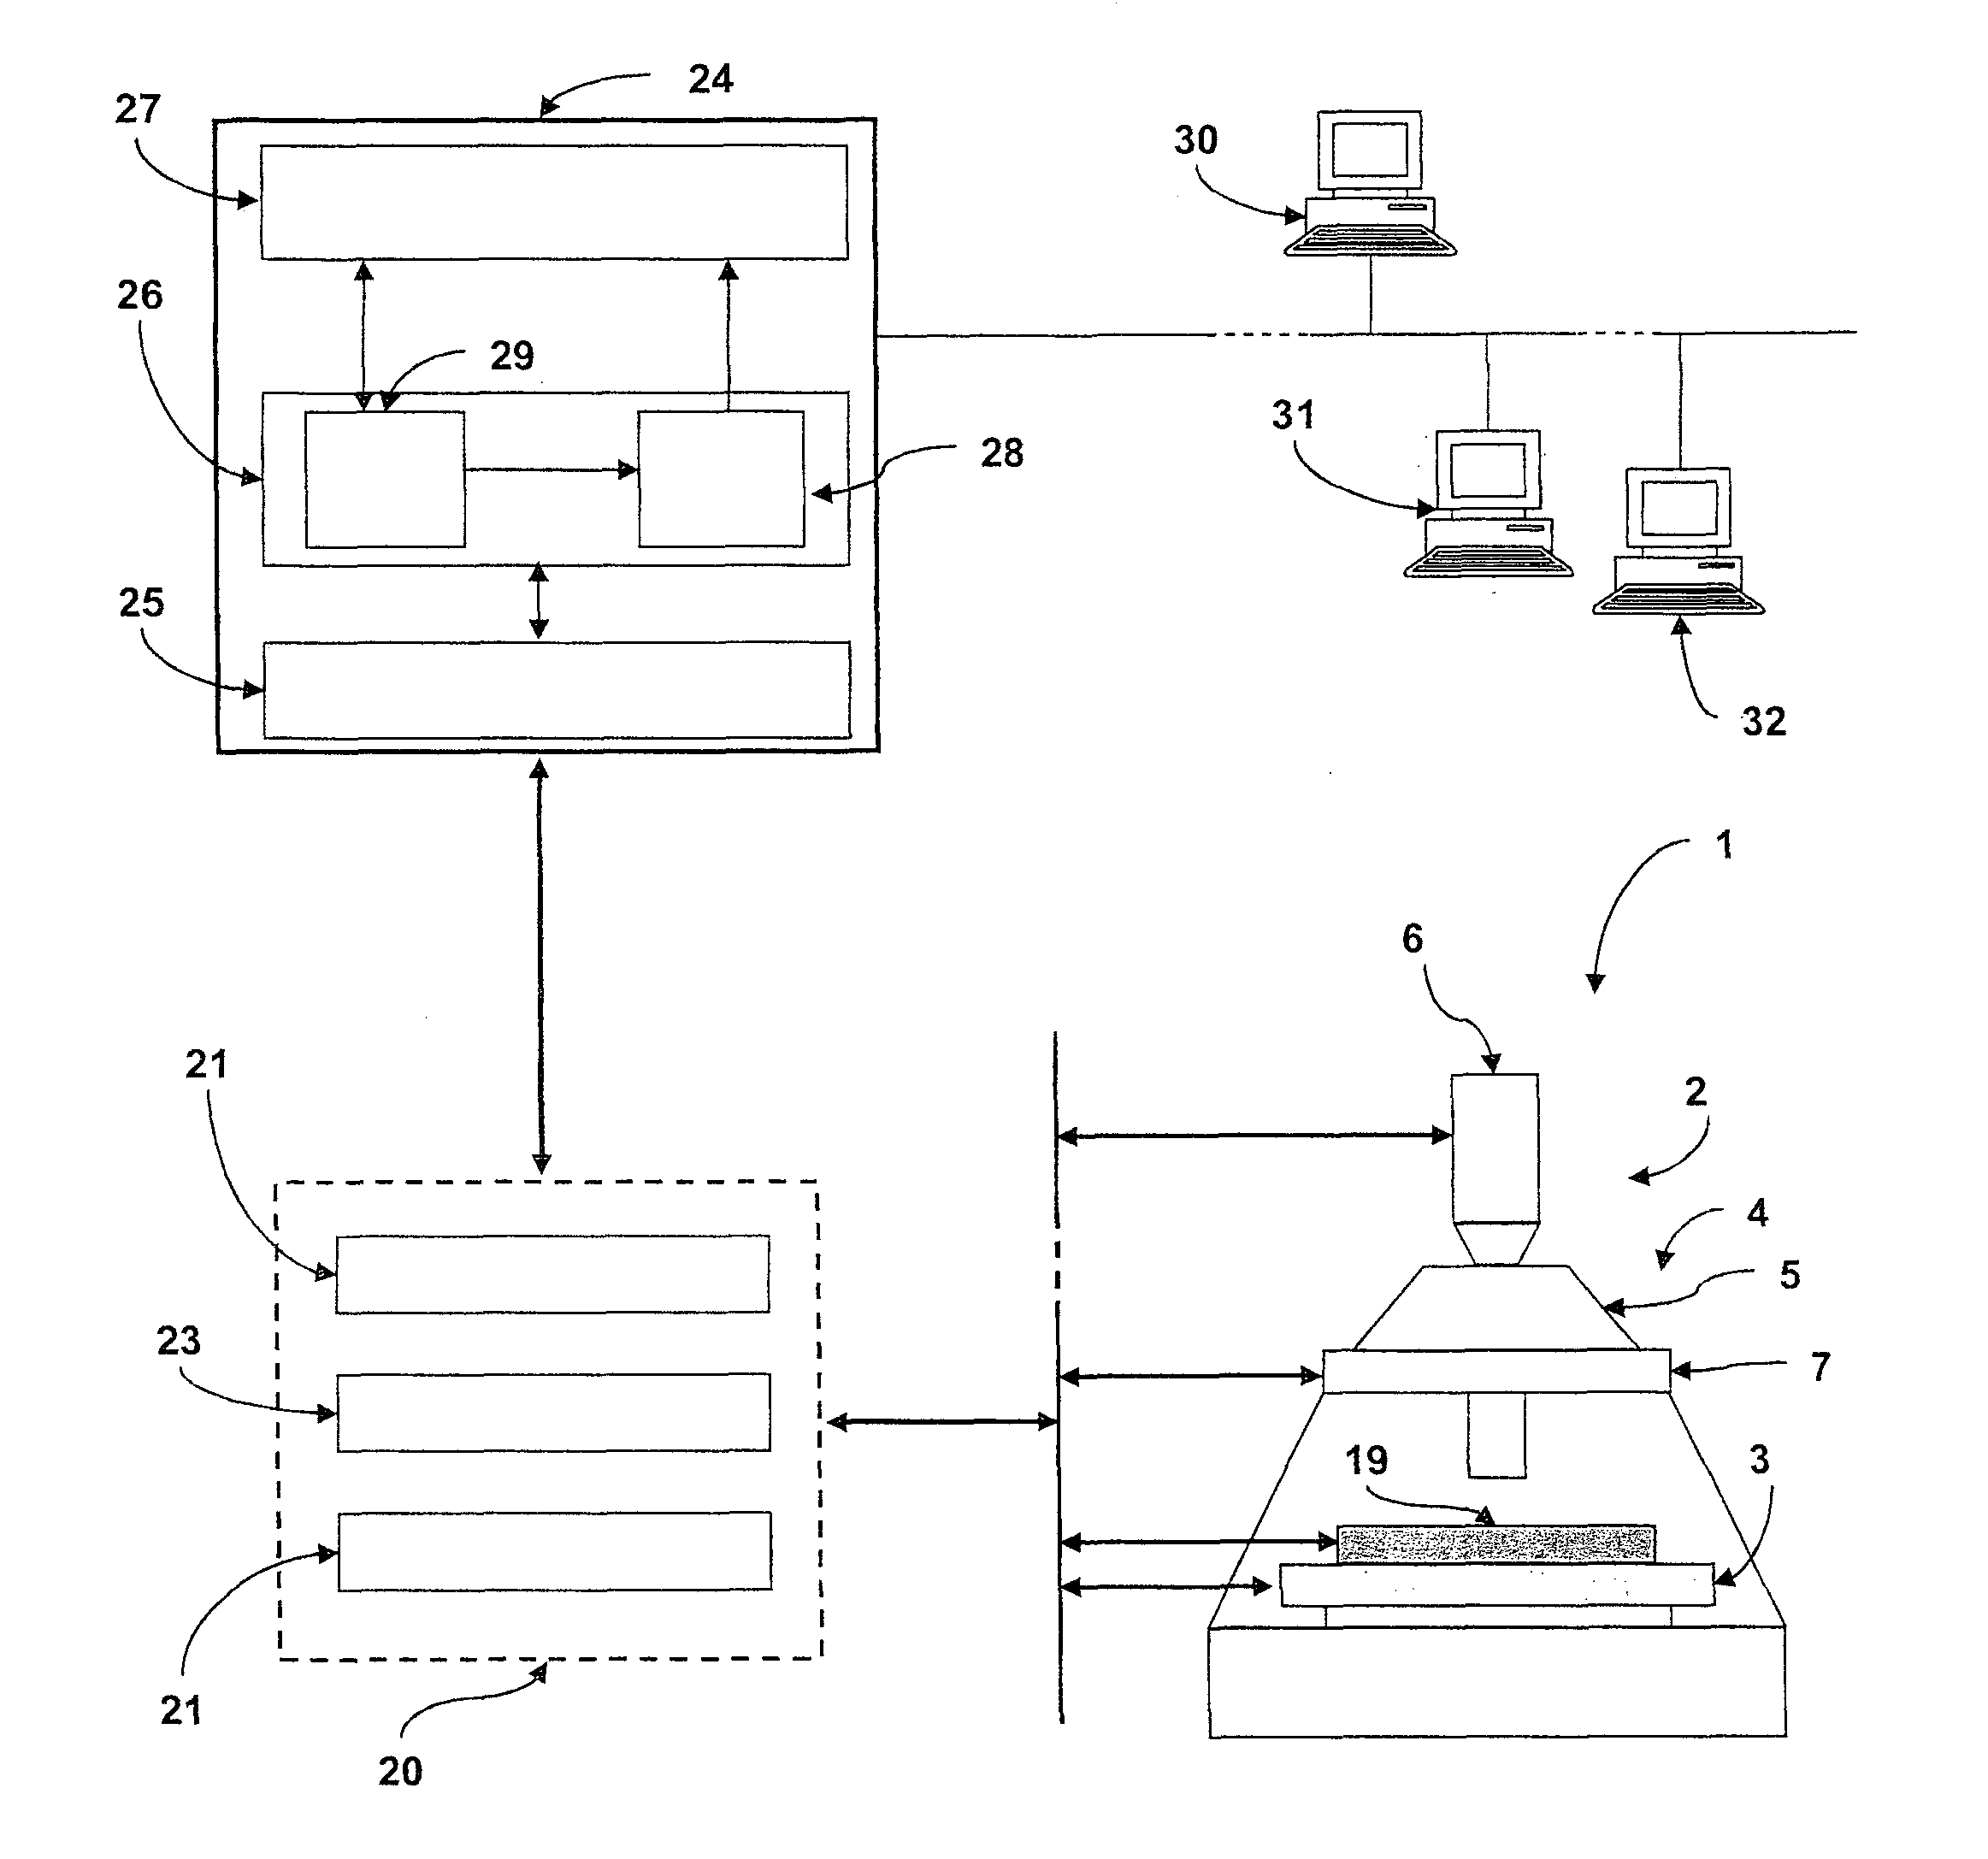 Method and Apparatus for the Identification and Handling of Particles